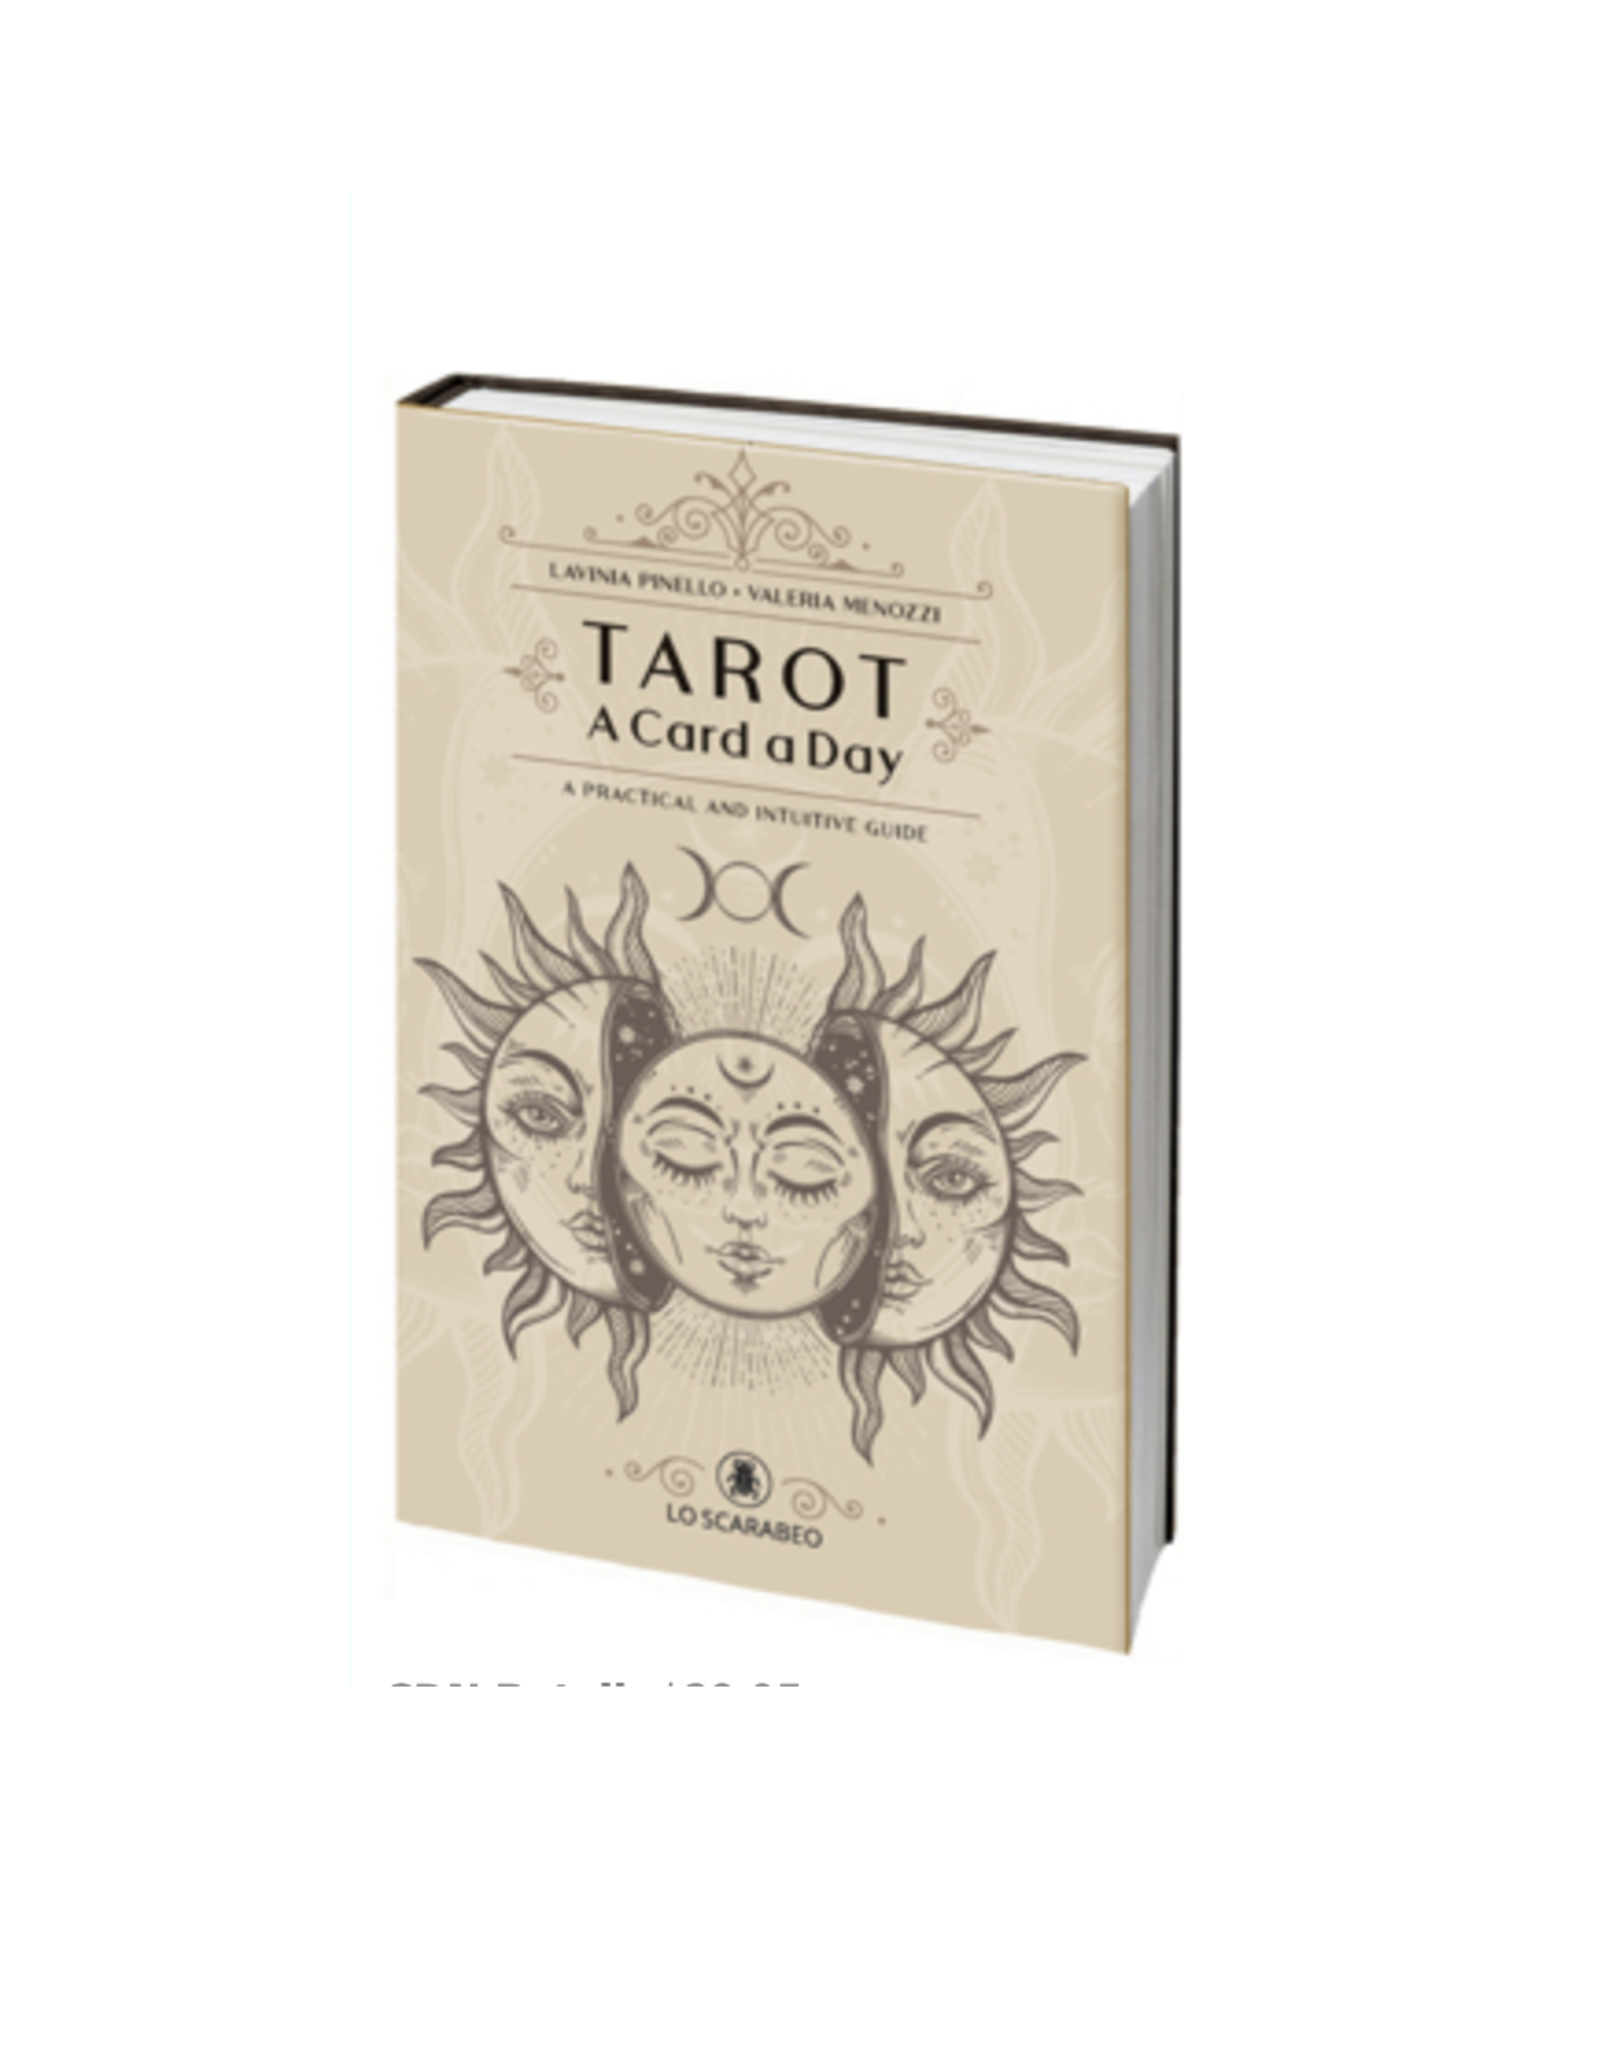 Tarot: A Card a Day - A Practical and Intuitive Guide